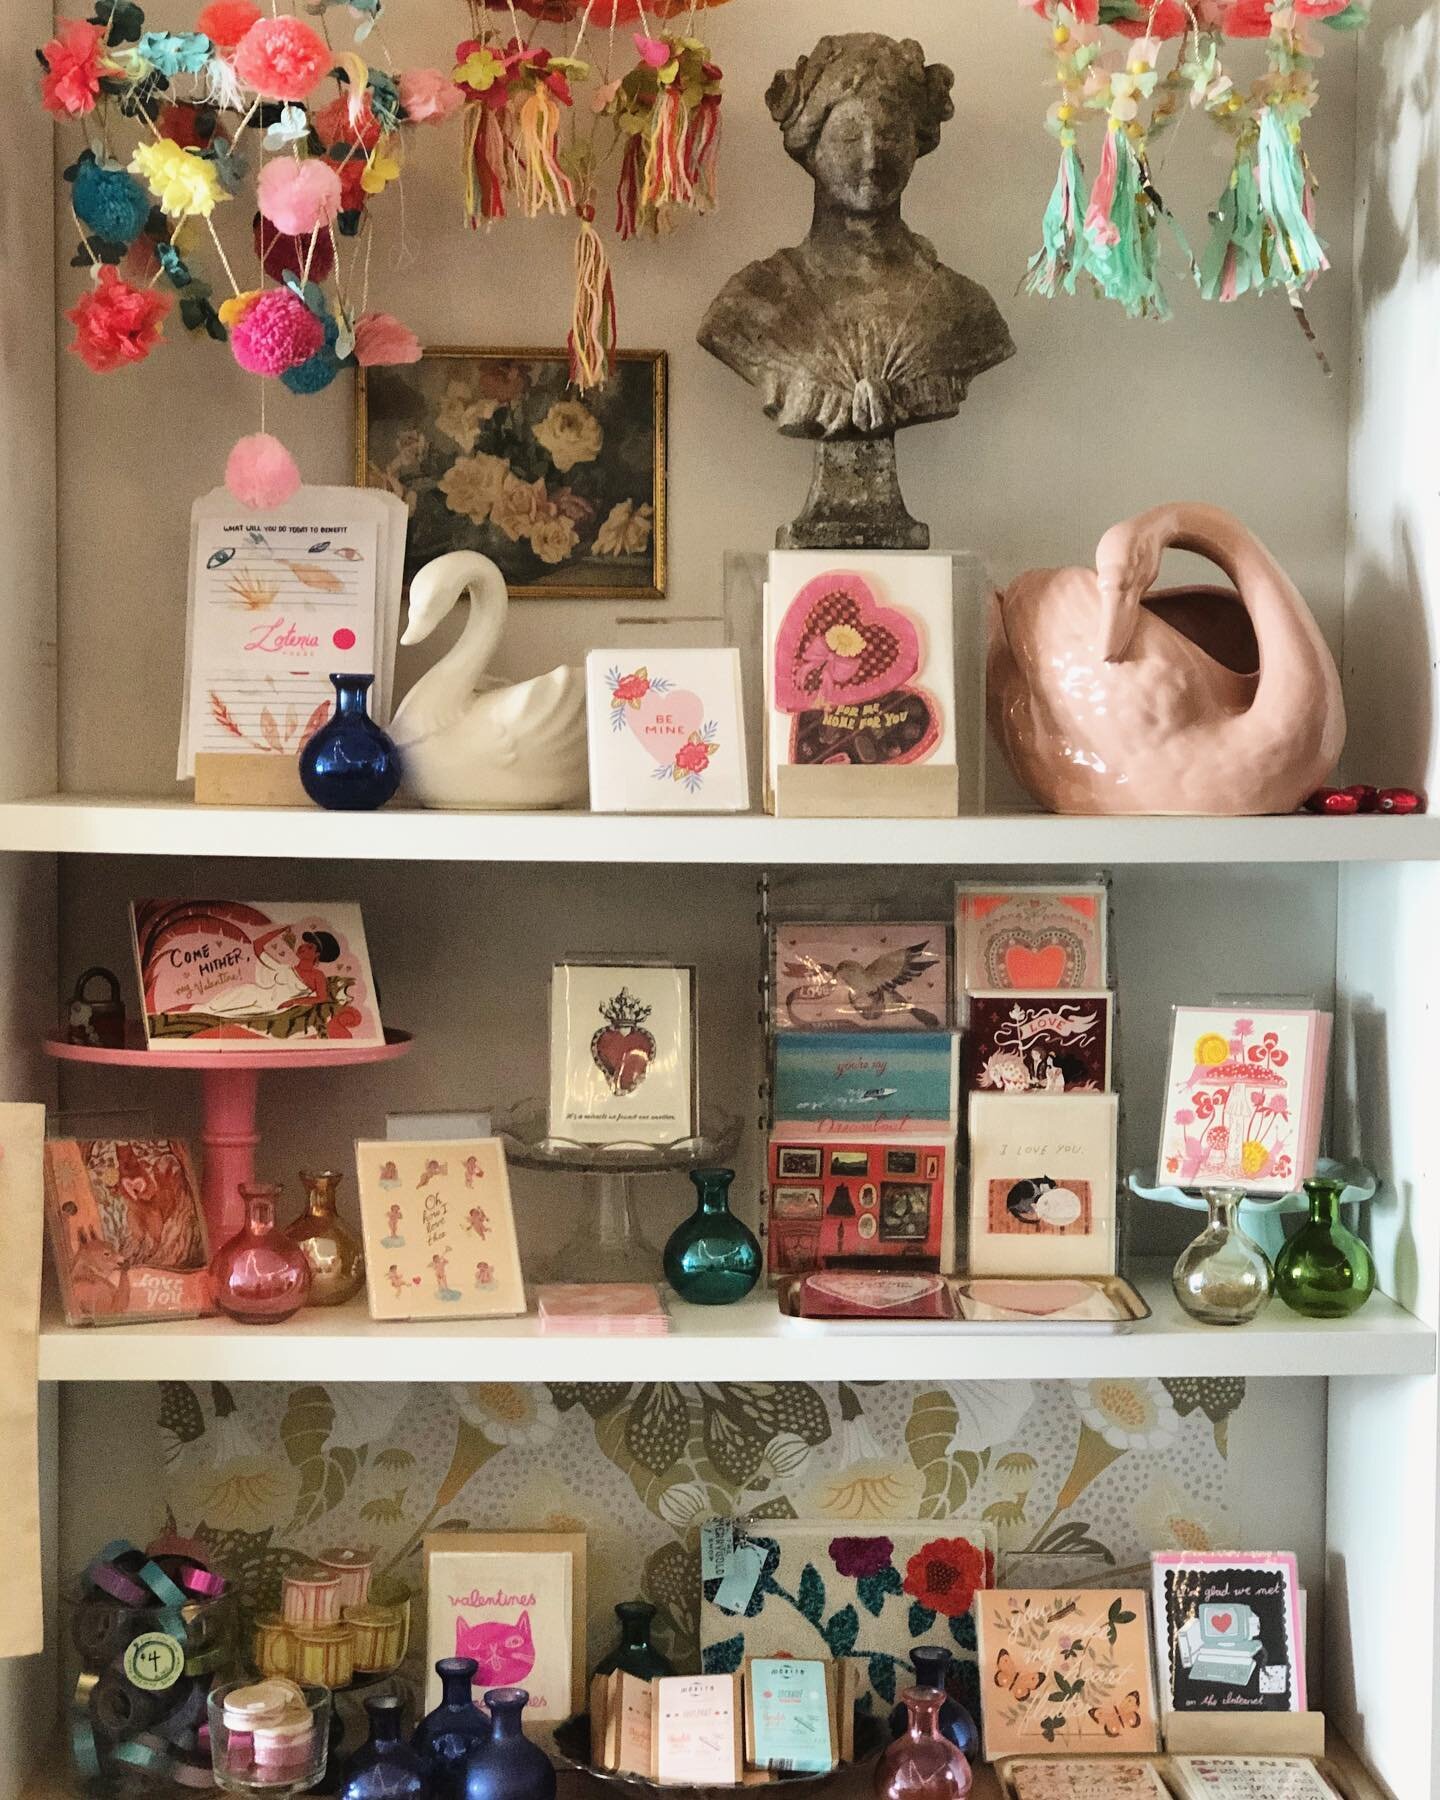 I spy ❤️🐌🦢🍄🔐🐱🌹🐿 
Can you find them all? 🥰
🎉Opening back up this Saturday and Sunday 11-5. All the same rules. 😷, 3 customers at a time, and of course my #1 rule be patient and kind to all.